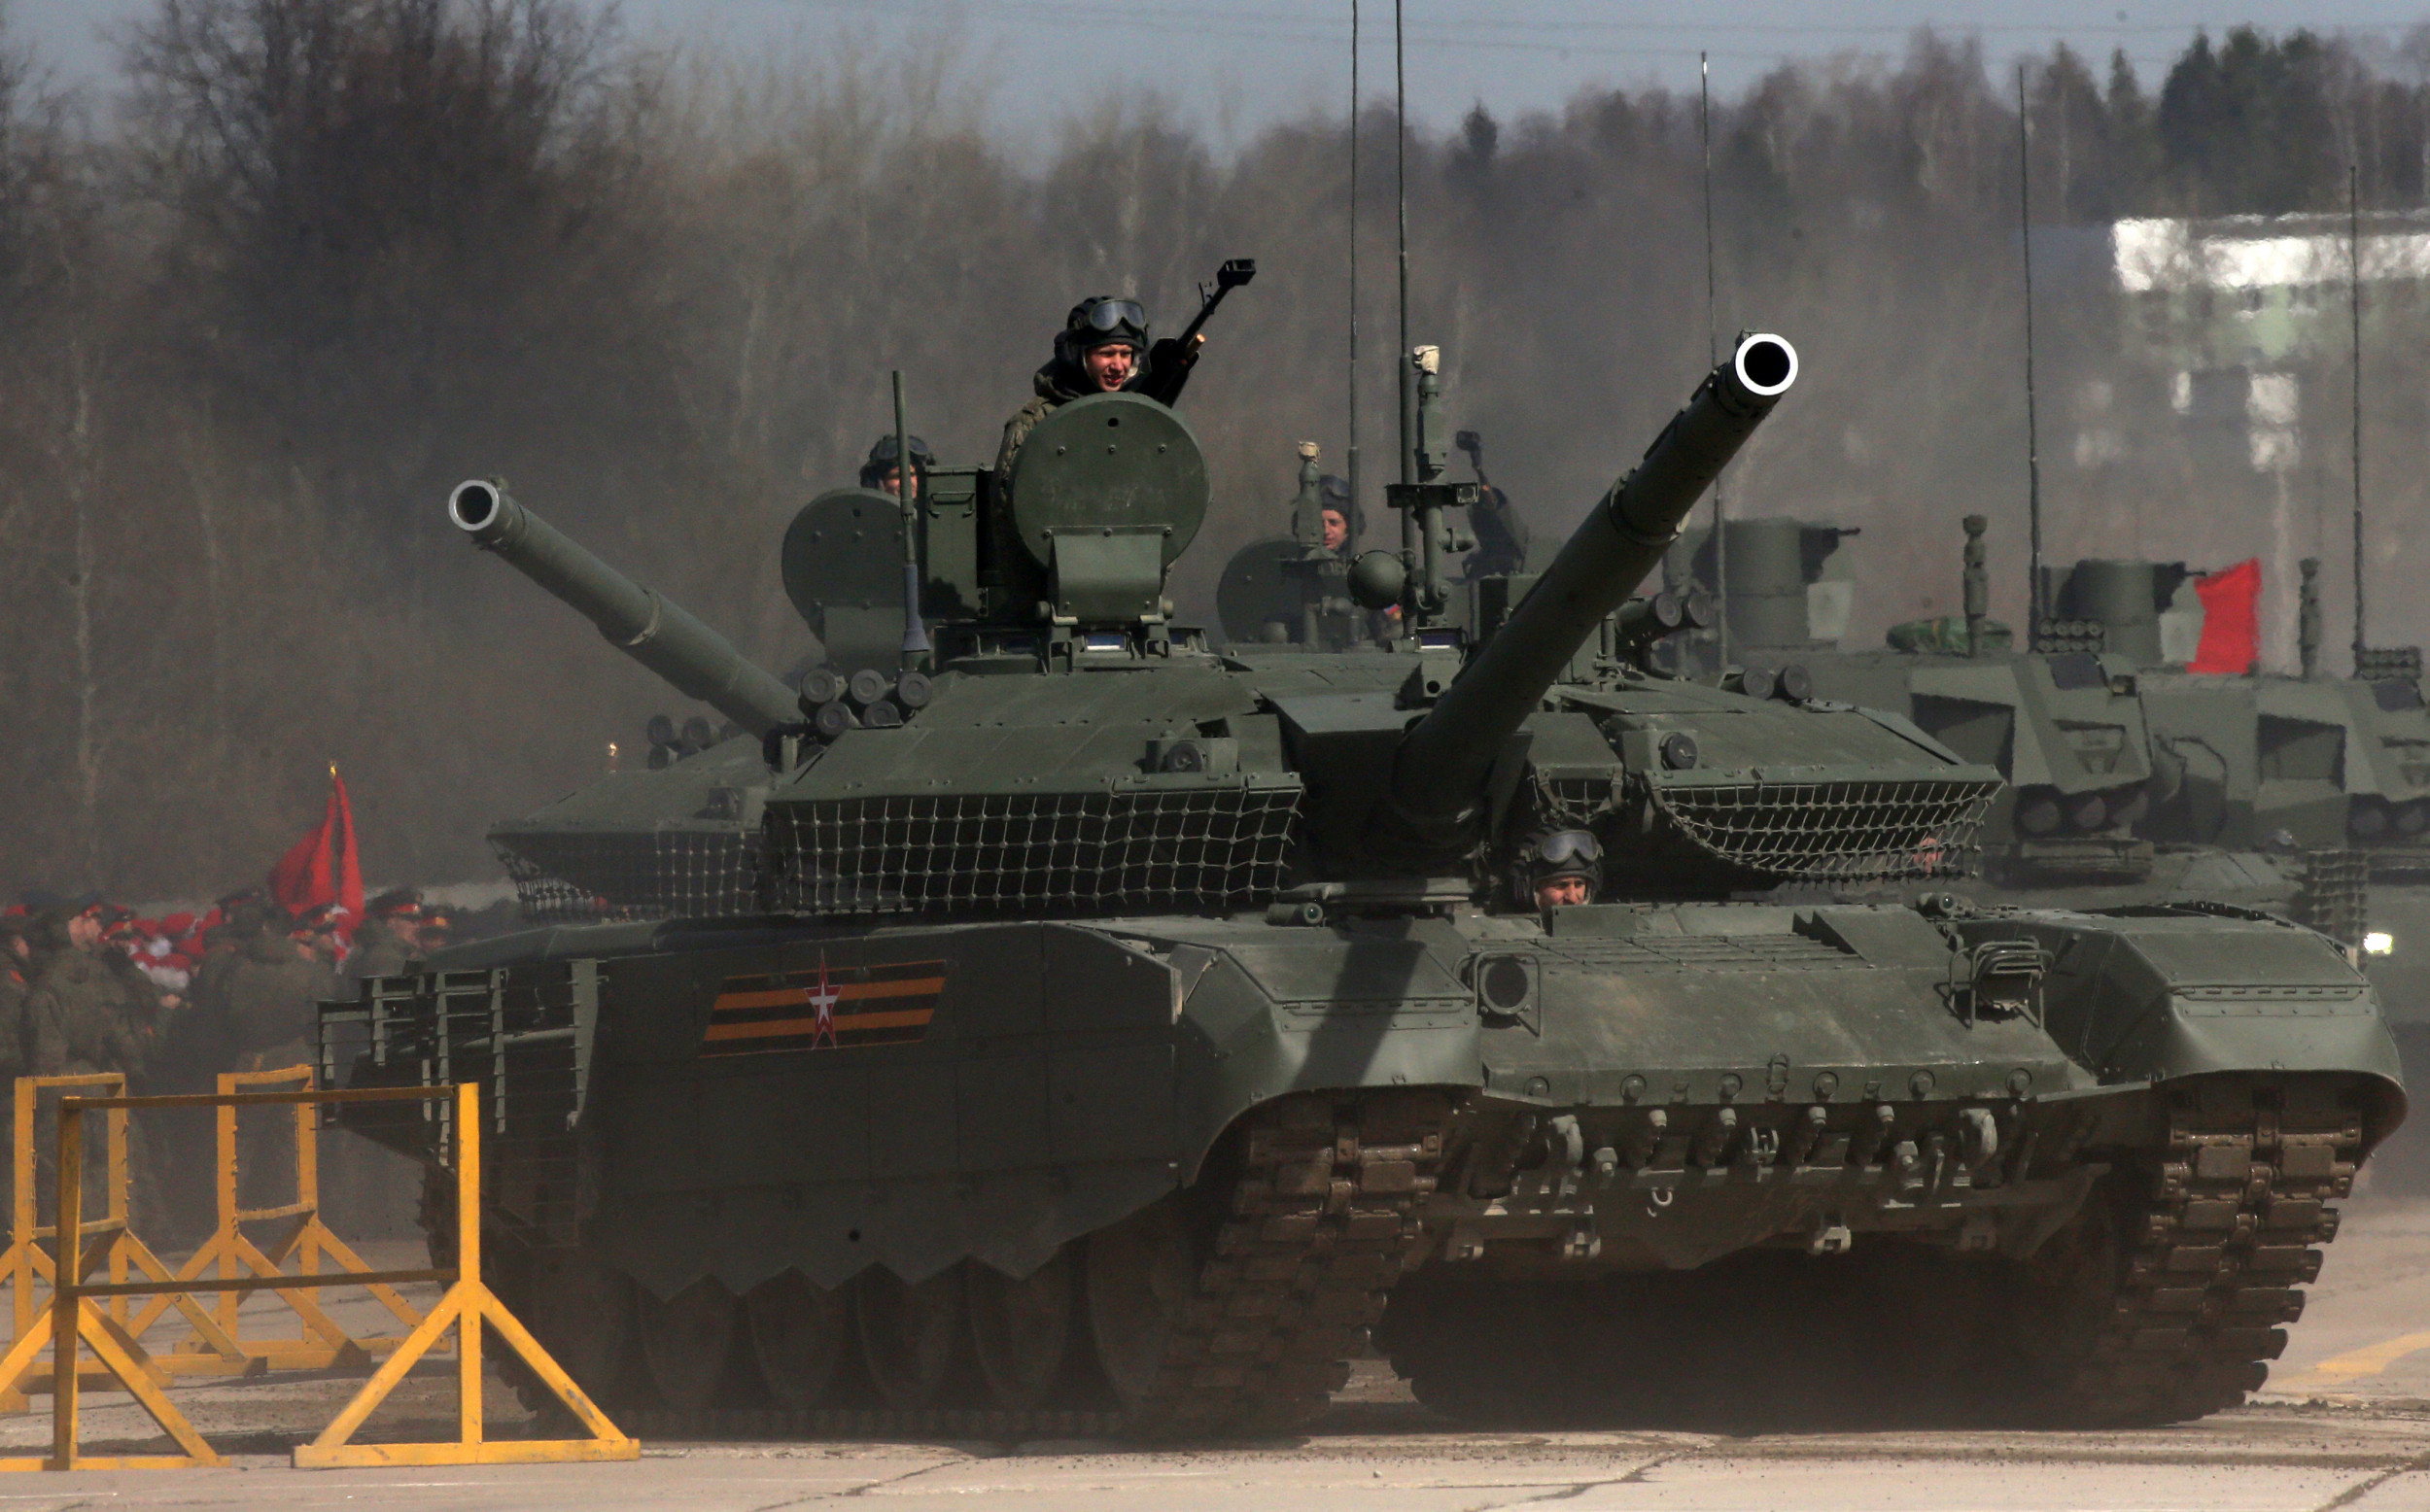 Putin Arming Troops With Newest Weapons as Russia Struggles in Ukraine